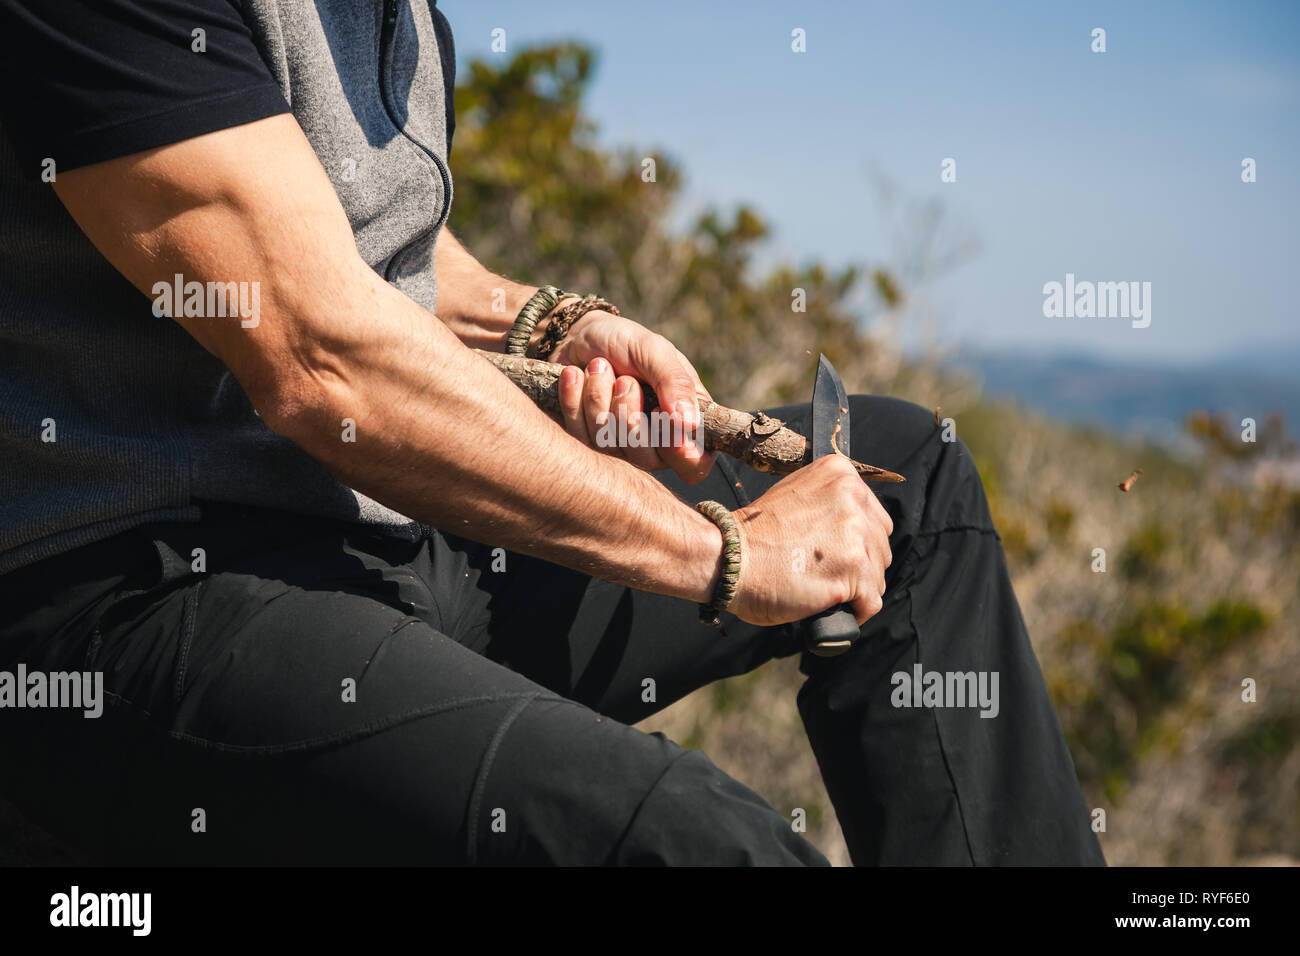 Man sitting on a rock in the nature with great view carving a stock of a tree with a knife, closeup Stock Photo